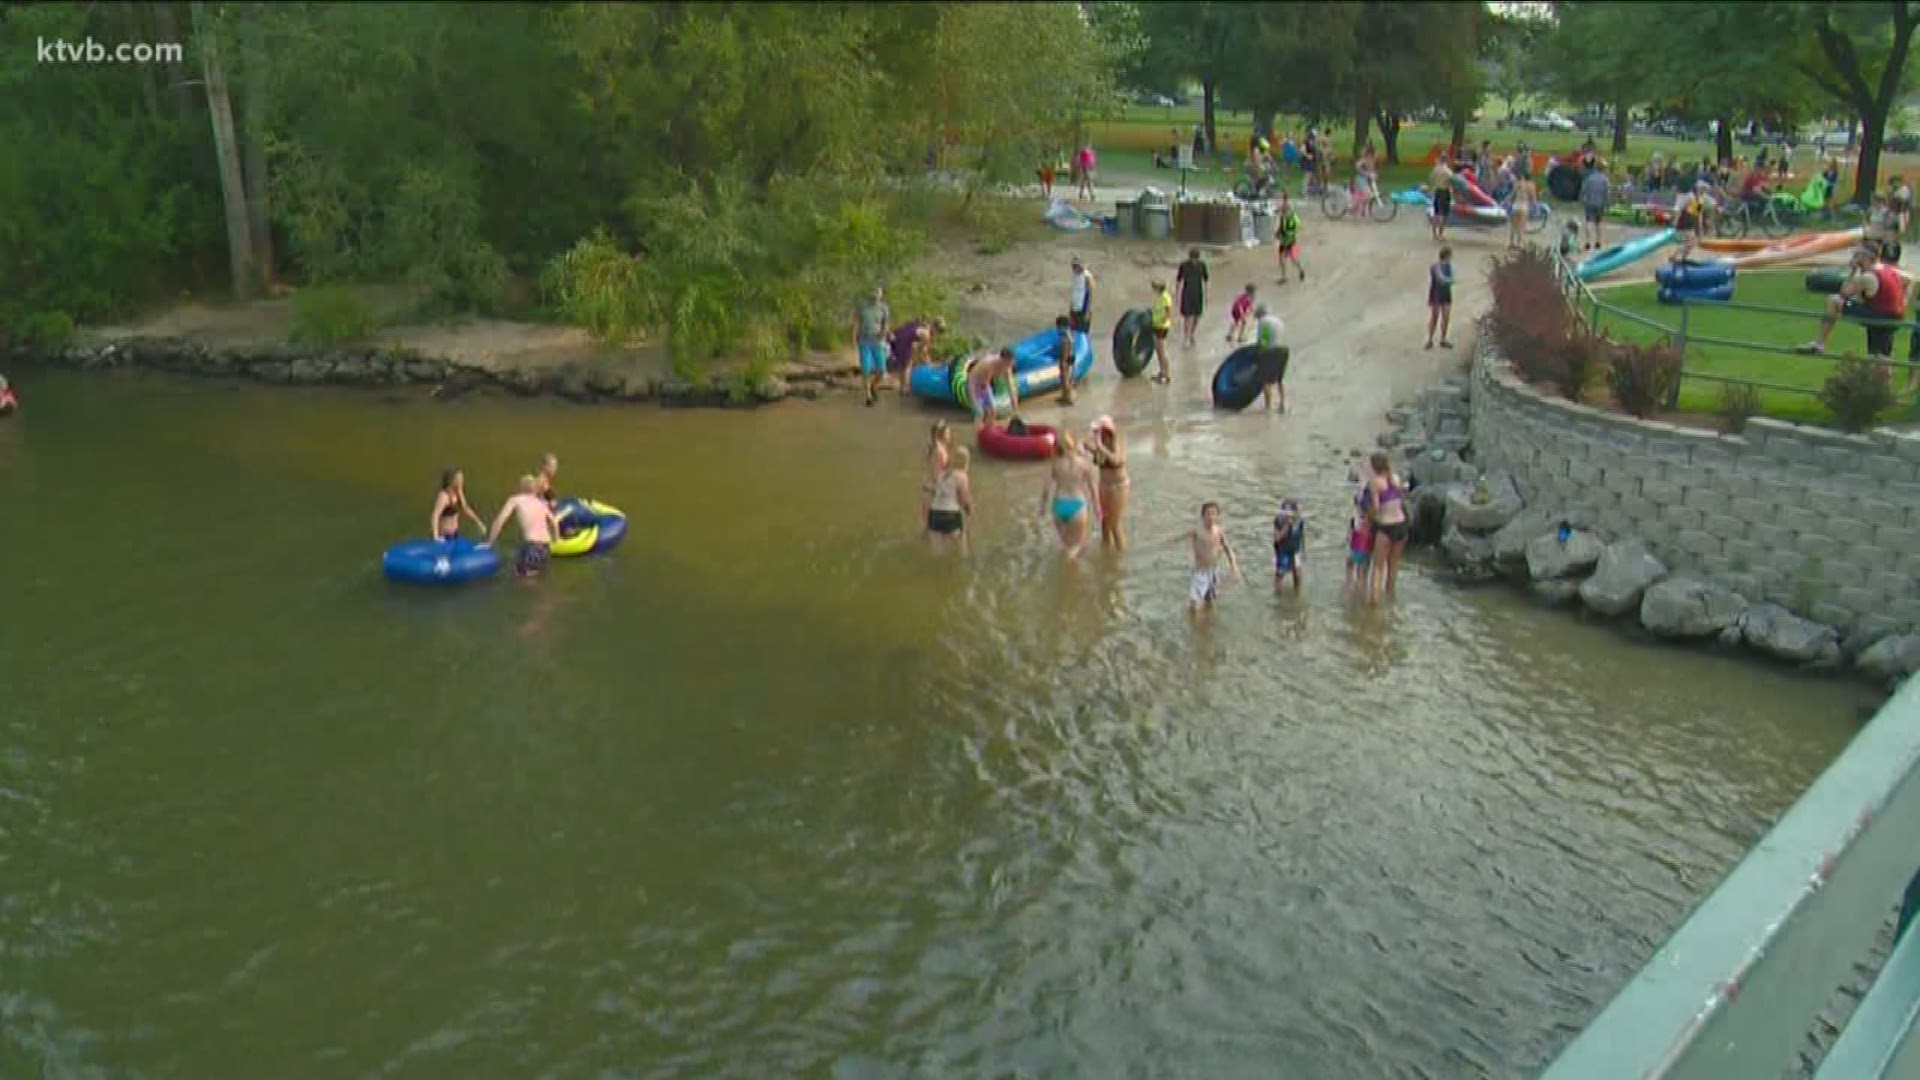 Whether you've never floated the Boise River before, or are a seasoned floater, here's what you need to know to make sure you stay safe on the river.